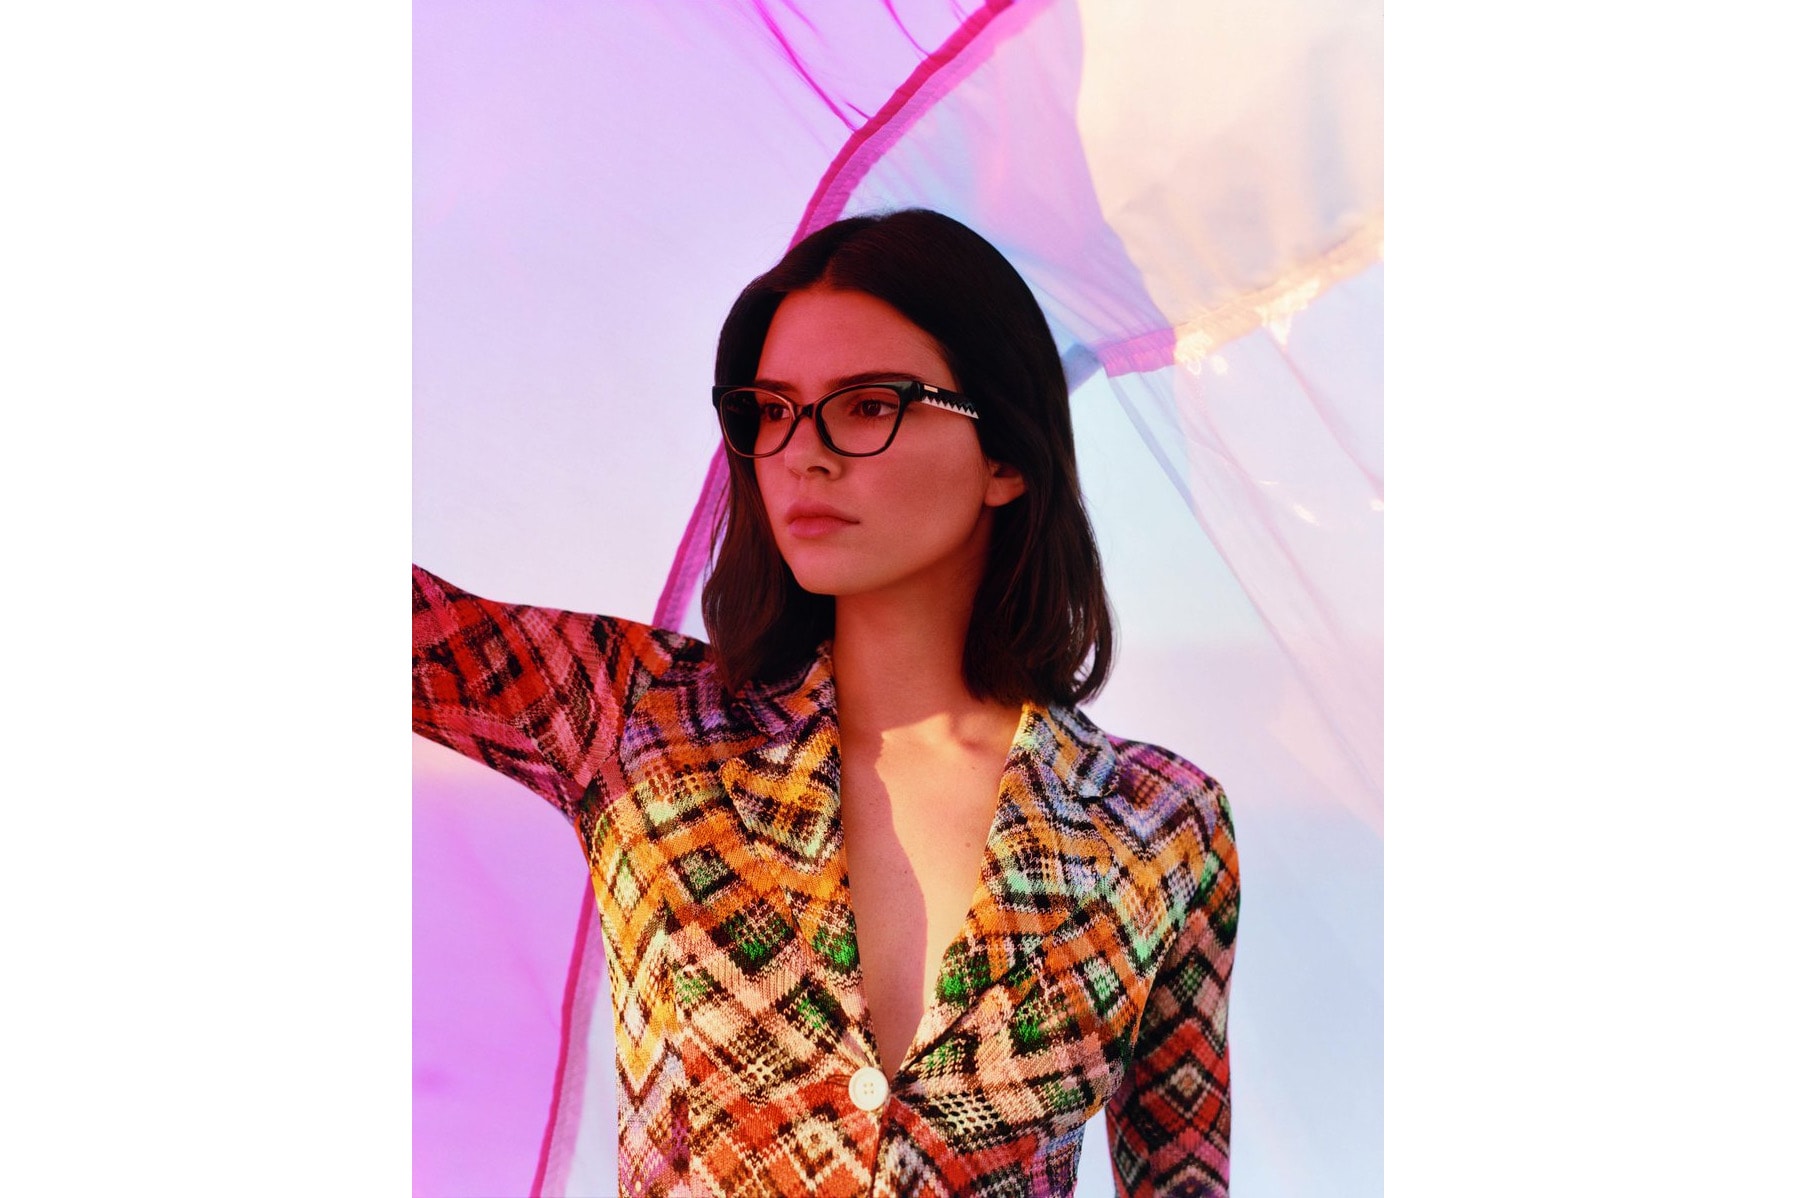 Kendall Jenner Missoni Colorful Spring Summer 2018 Photoshoot White Sands National Monument Campaign Ad